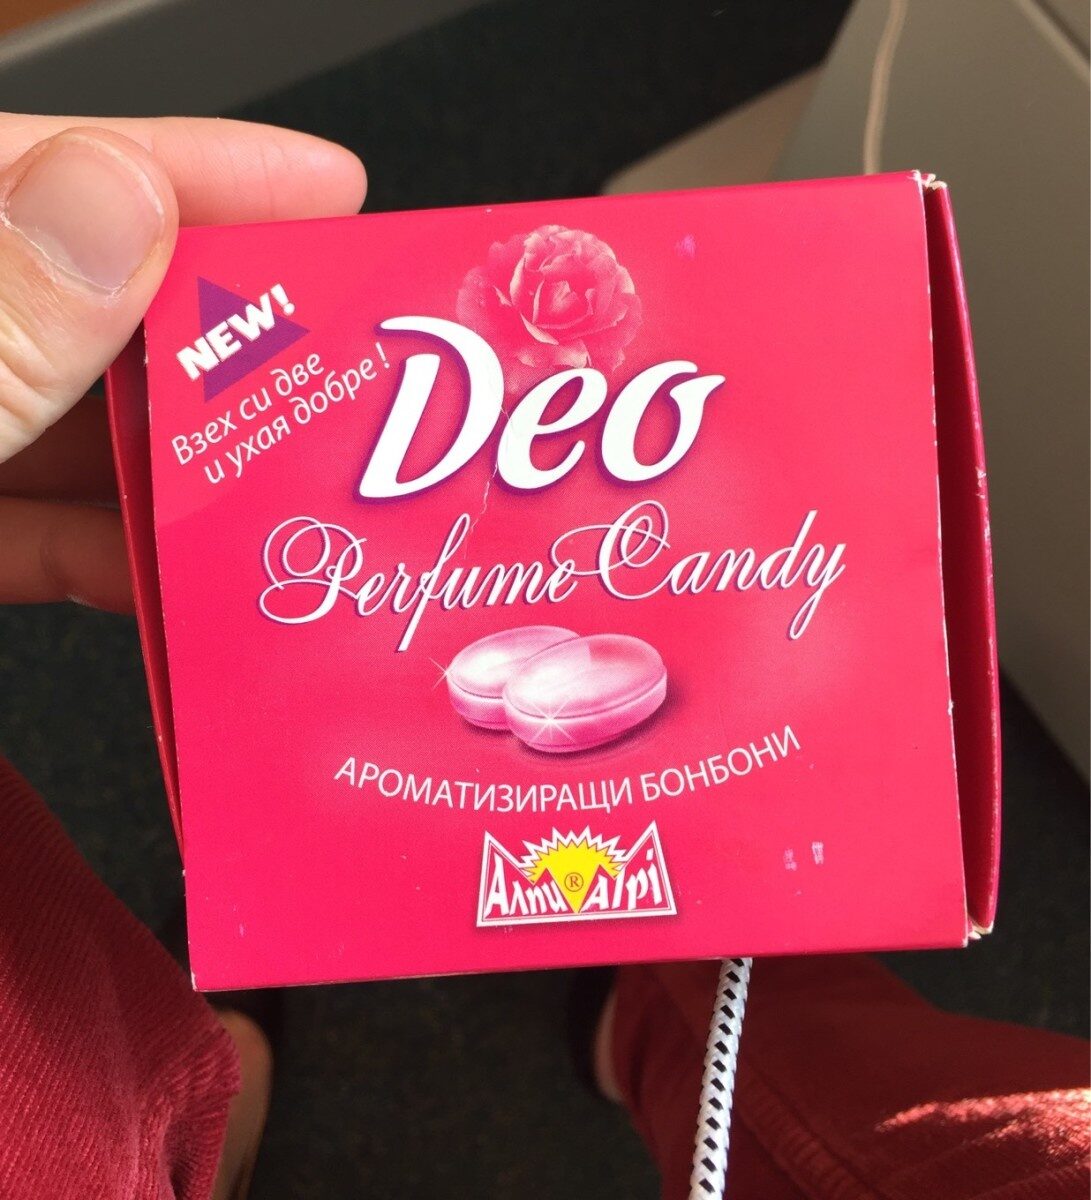 Deo perfume candy - Product - fr